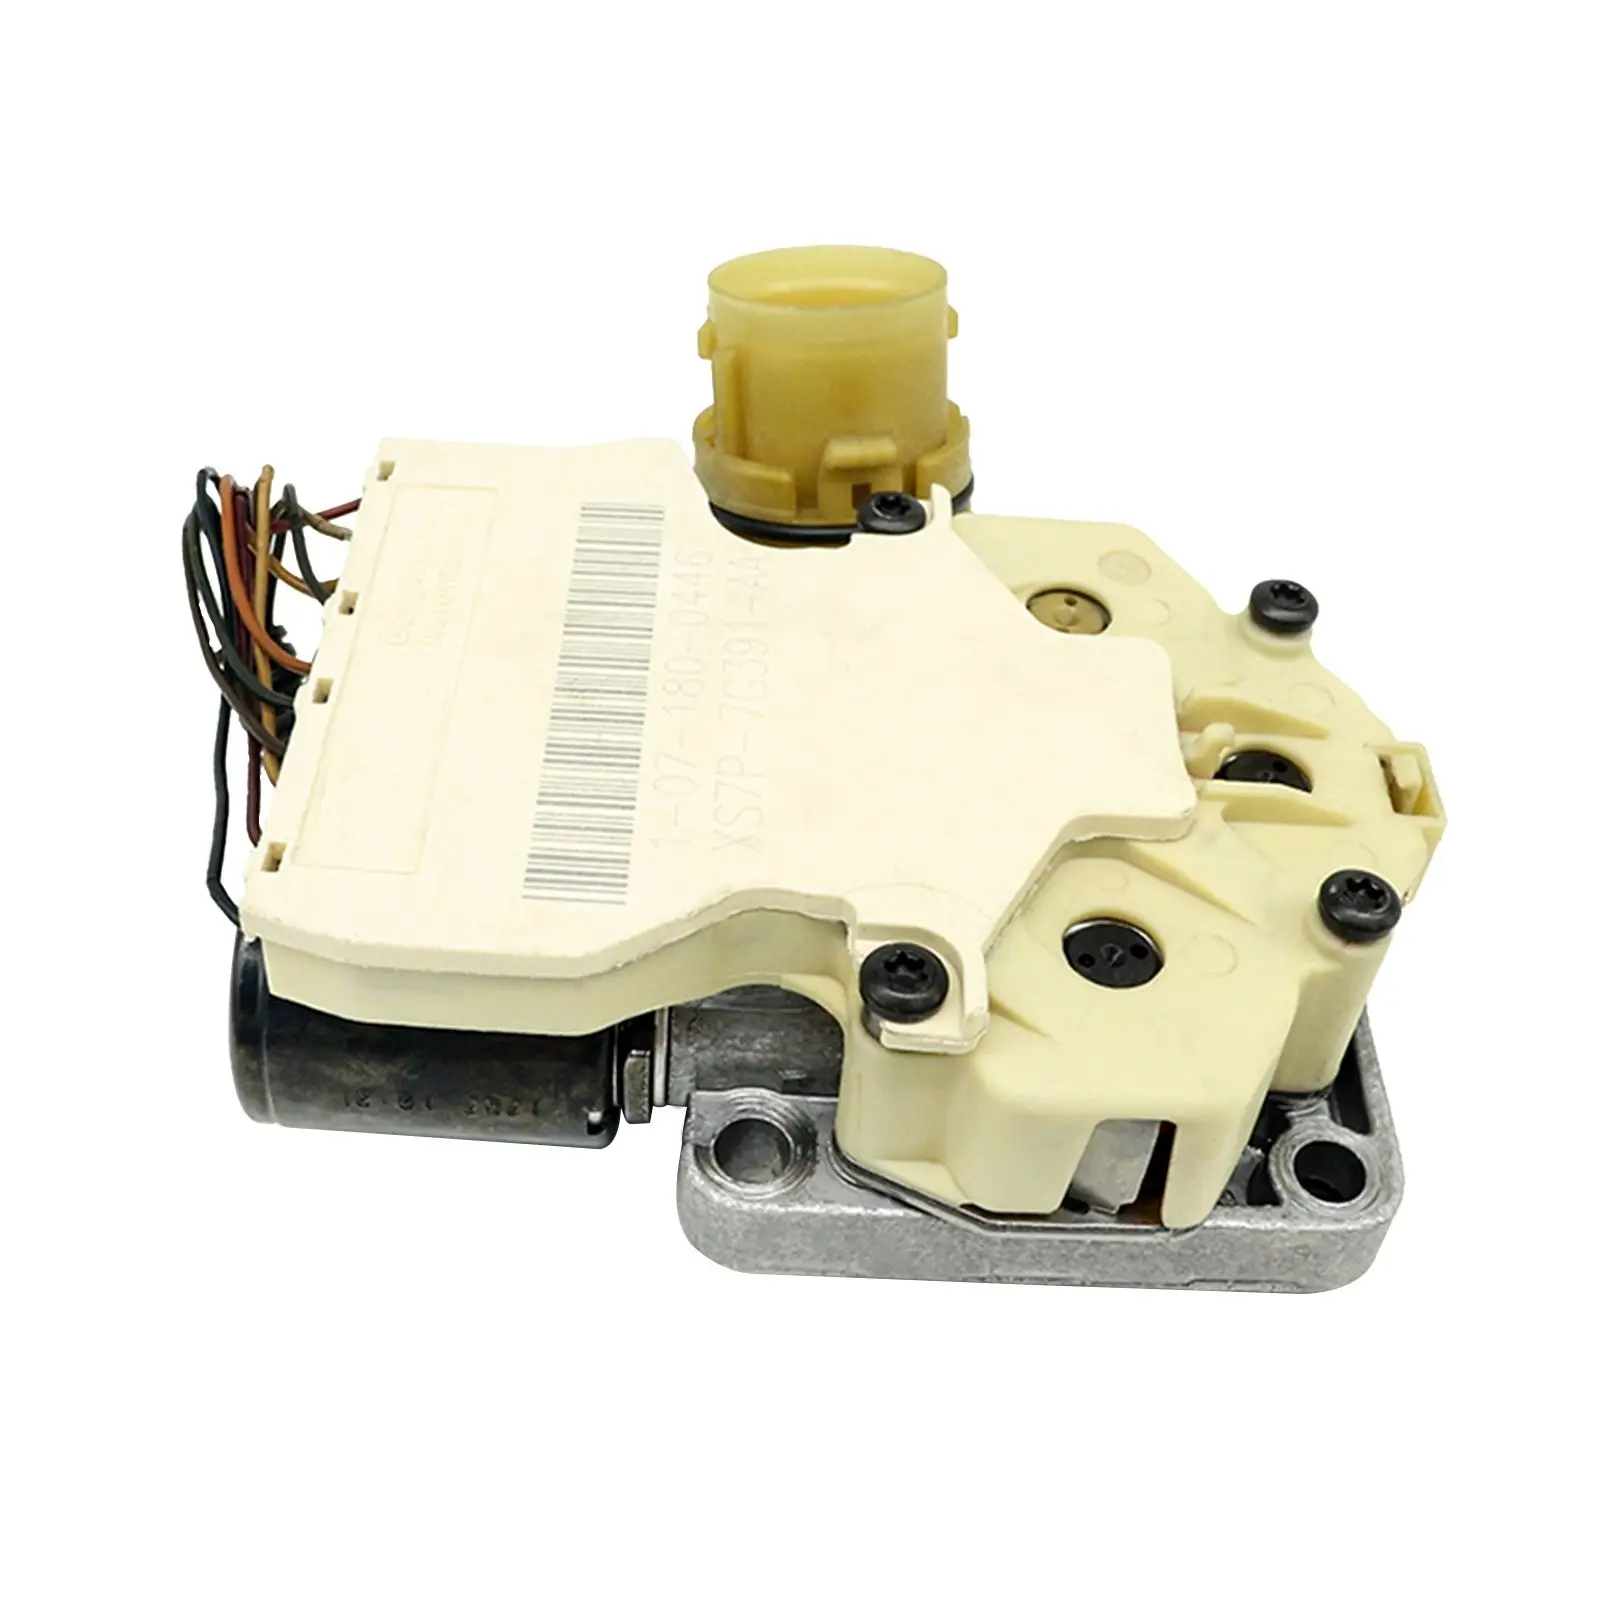 

Transmission Solenoid Pack Block F6RZ-7G391-A Replacement Fit for Probe 1994-97 L4 2.0L for Mariner 2005-08 L4 2.3L